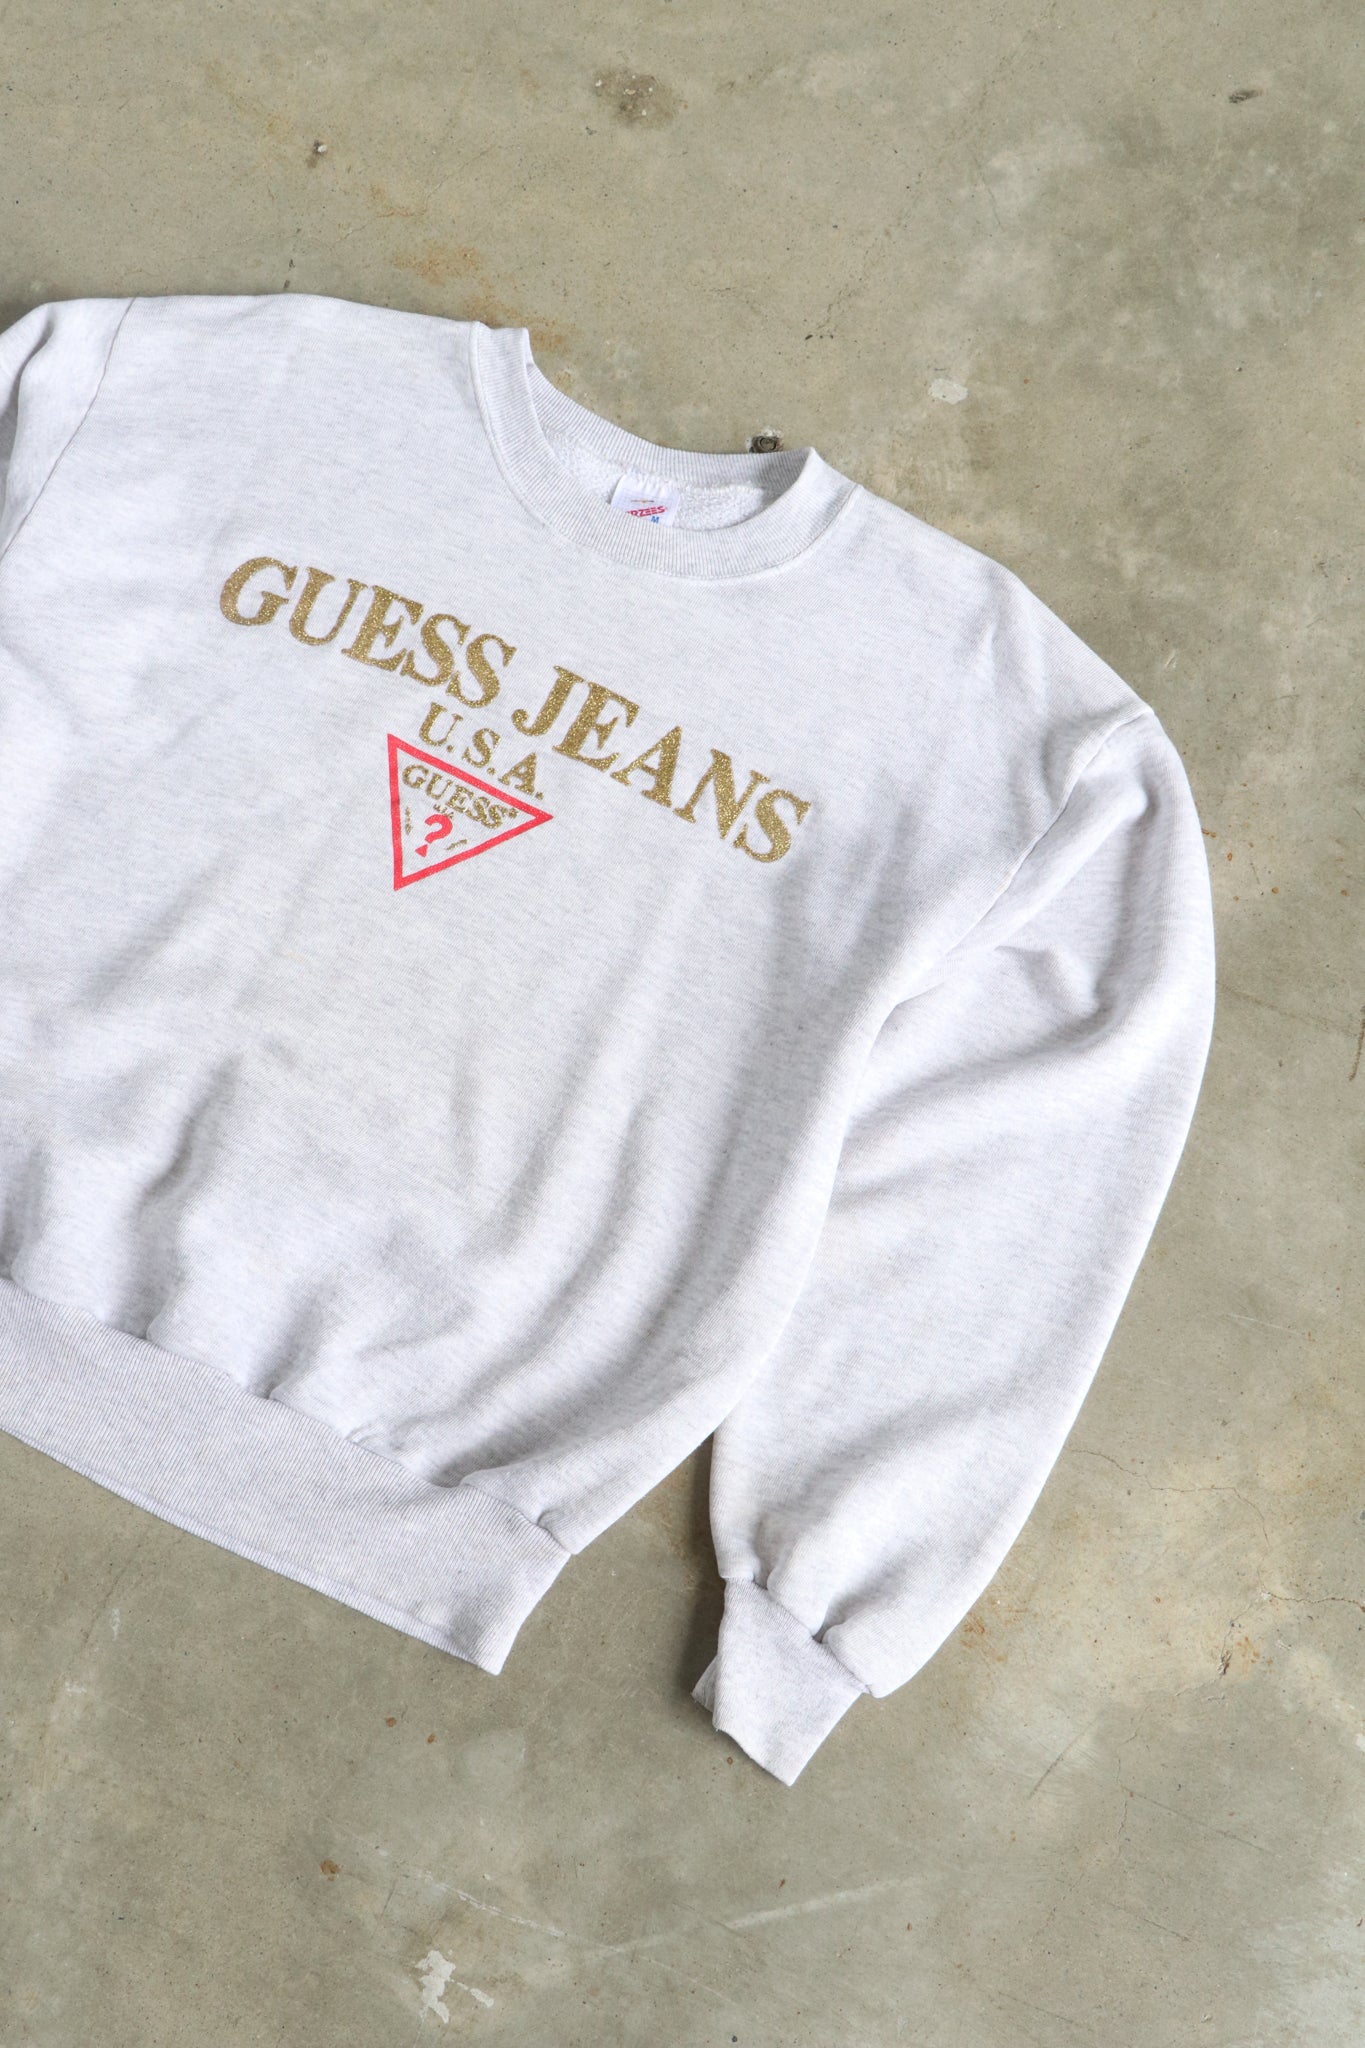 Vintage Guess Jeans Sweater Medium